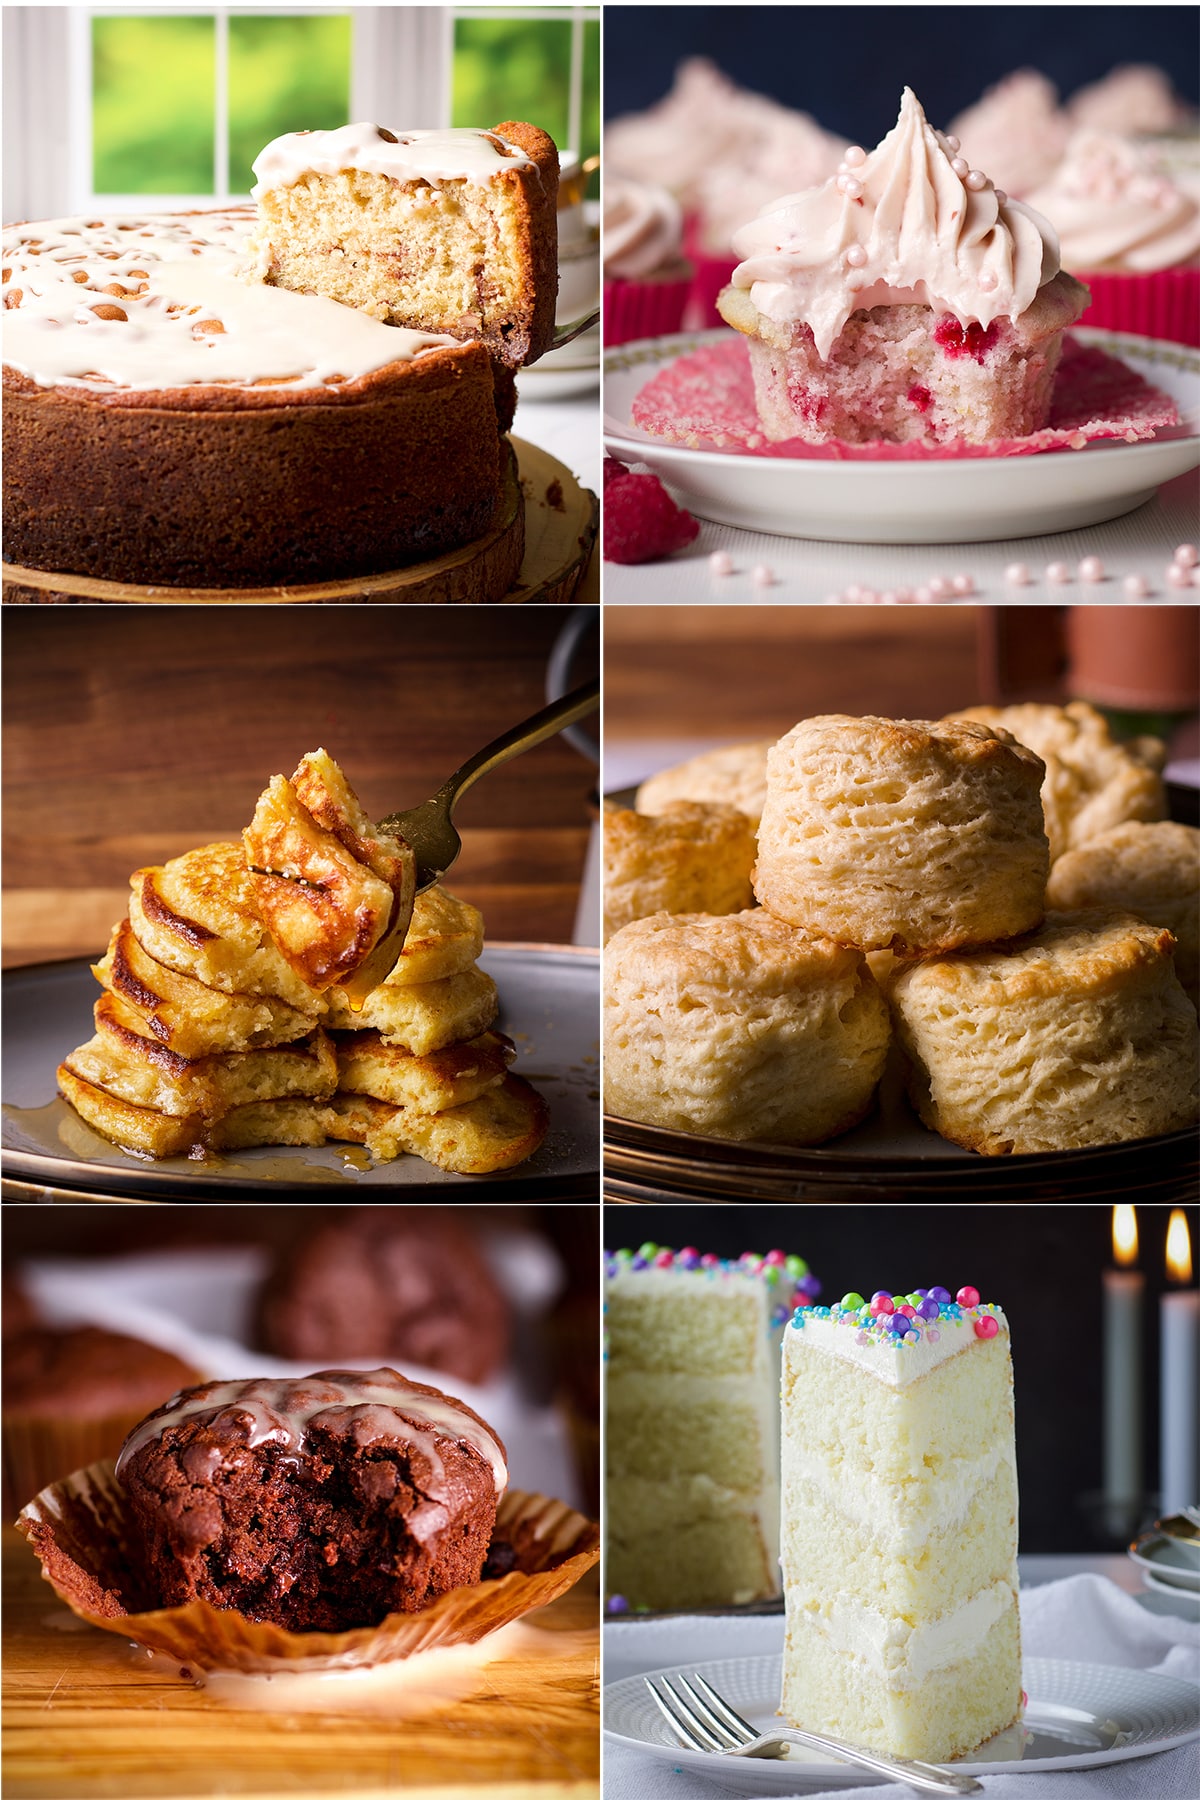 Six of the best baking recipes made with buttermilk: buttermilk coffee cake, raspberry muffins, buttermilk pancakes, buttermilk biscuits, vanilla cake, and chocolate muffins.